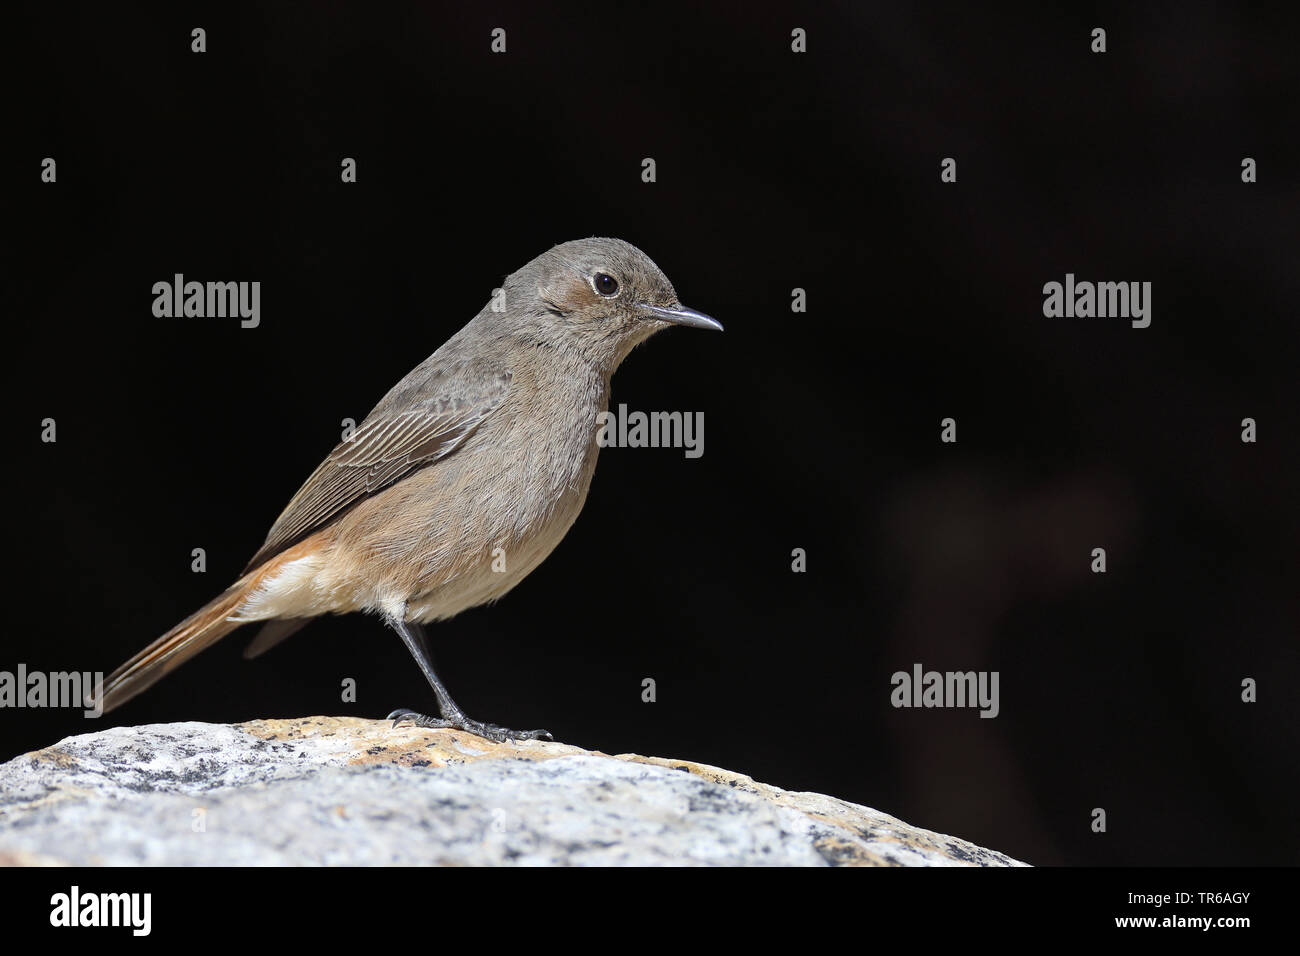 Familiar chat (Cercomela familiaris), sitting on a rock, South Africa, Klaarstrom Stock Photo